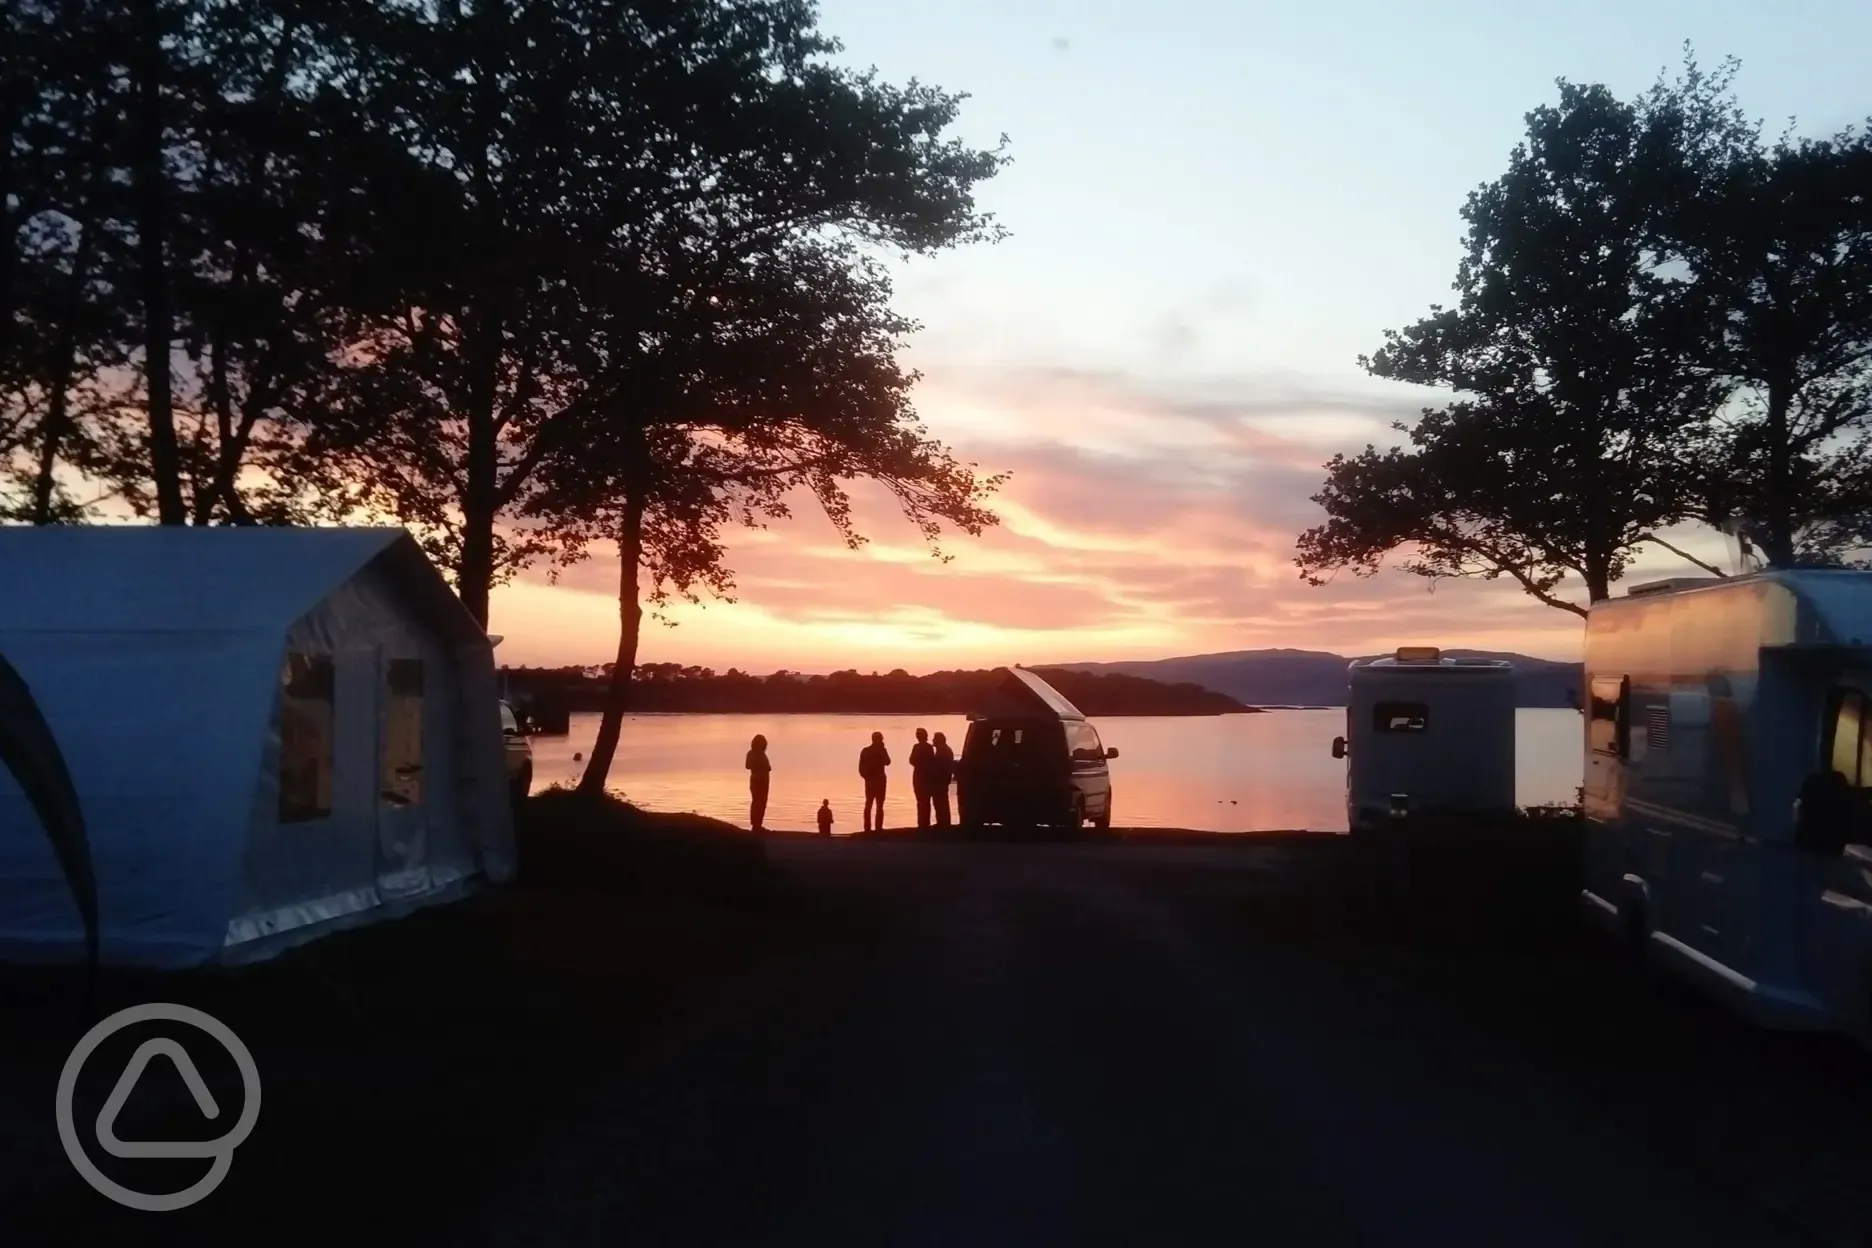 Sunset from shore side at Shieling holidays, Isle of Mull